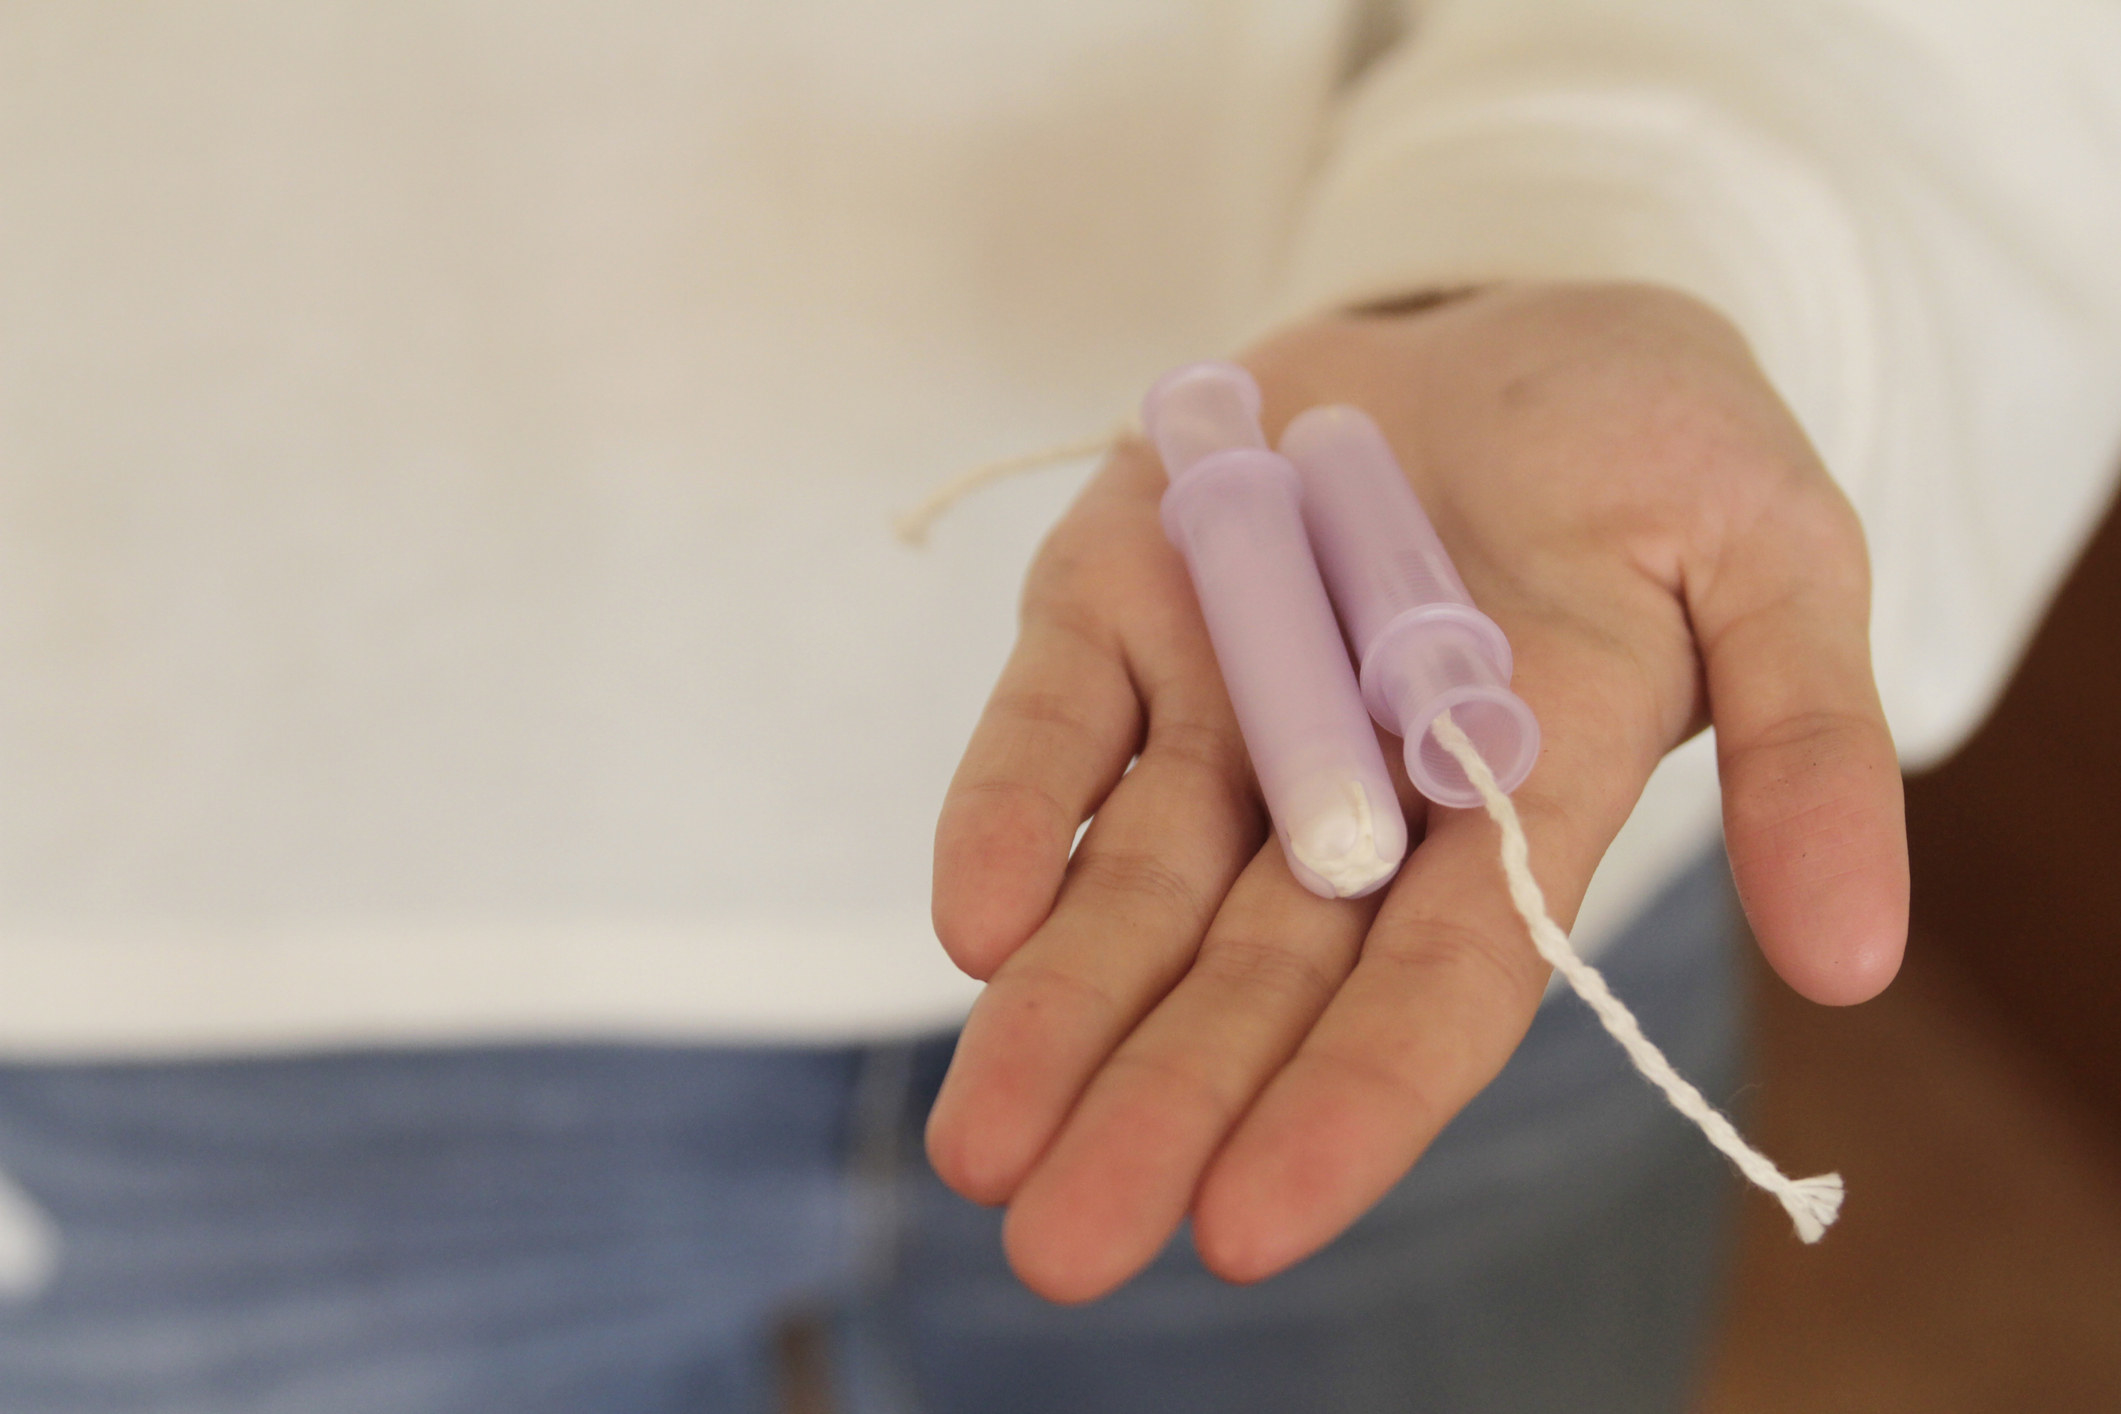 A woman holding tampons in her hand